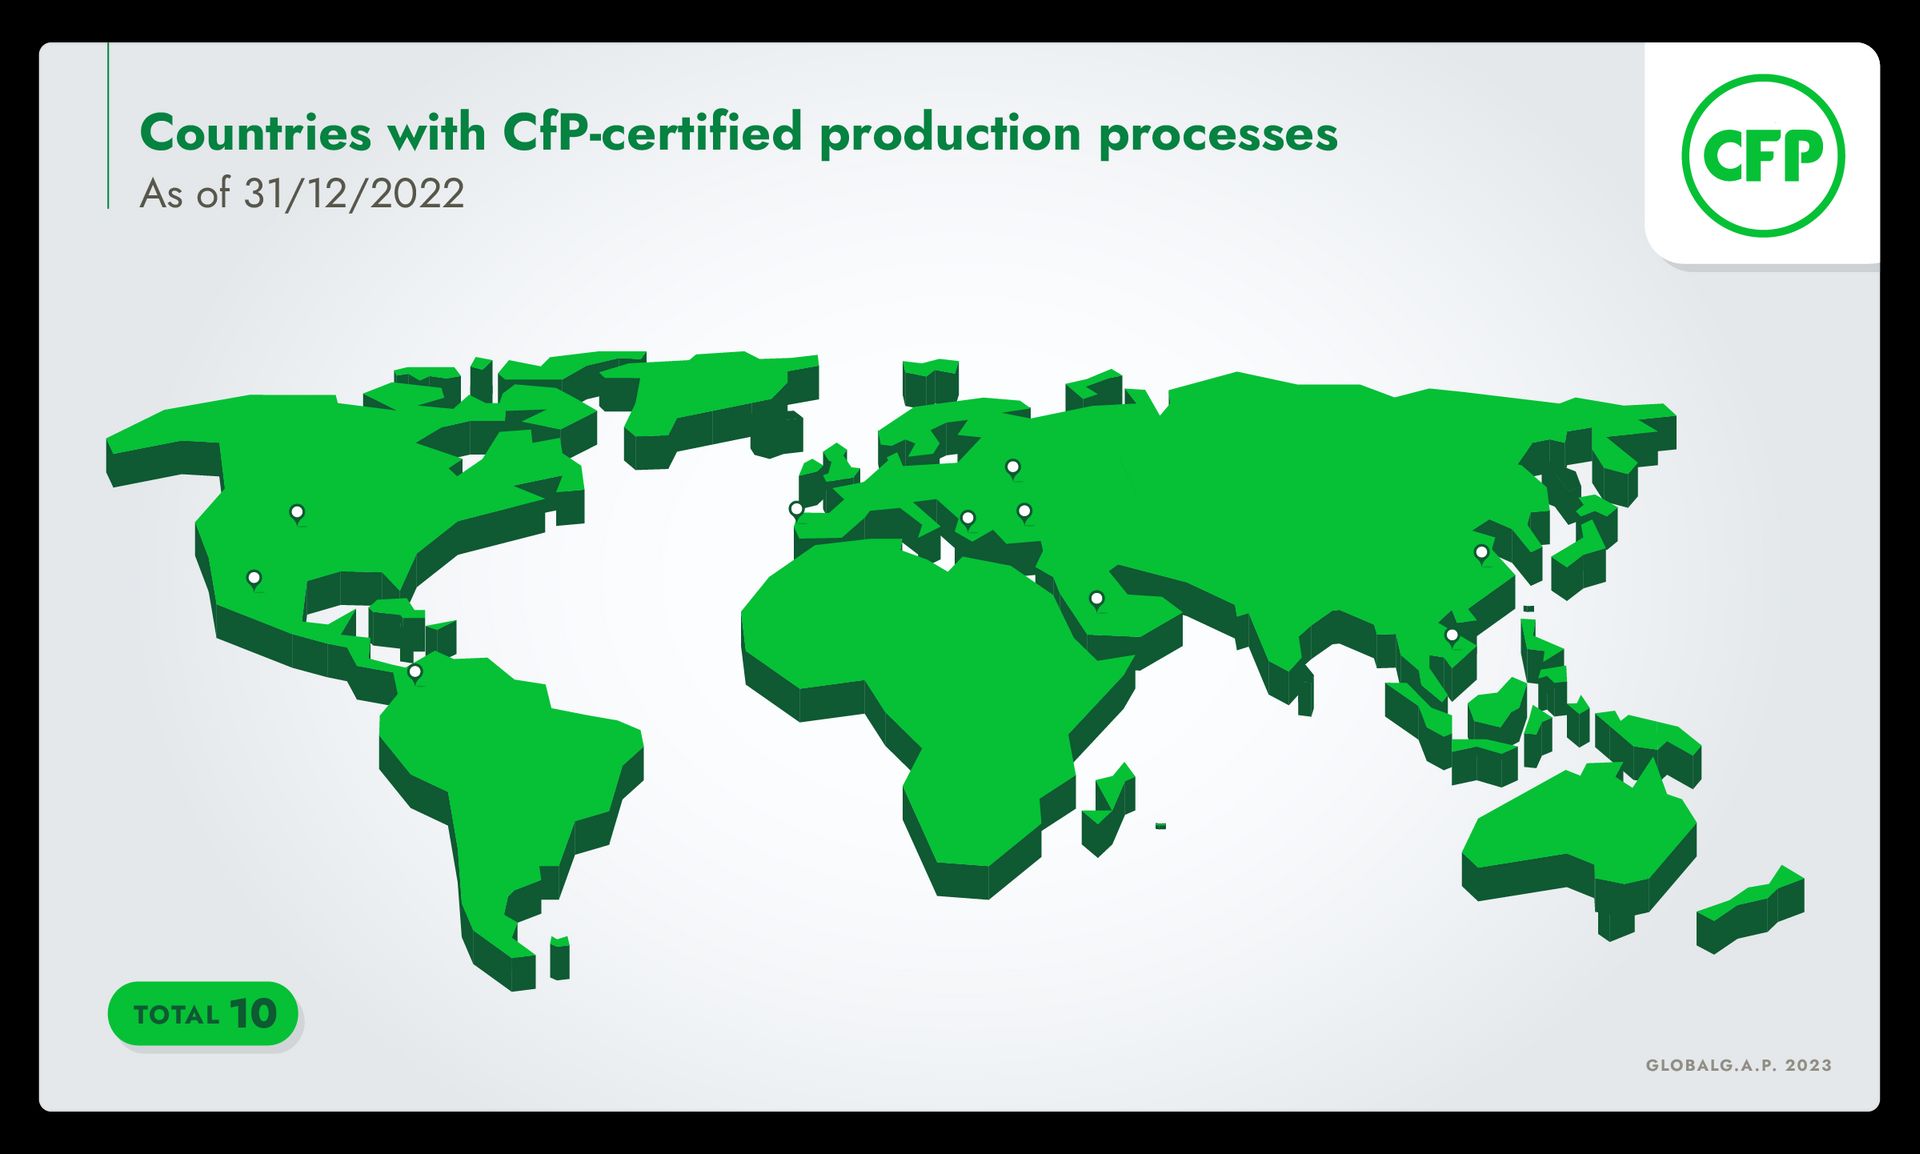 World map identifying countries with Crops for Processing certified production processes: Angola, China, Colombia, Greece, Mexico, Portugal, Turkey, Ukraine, United States, Vietnam